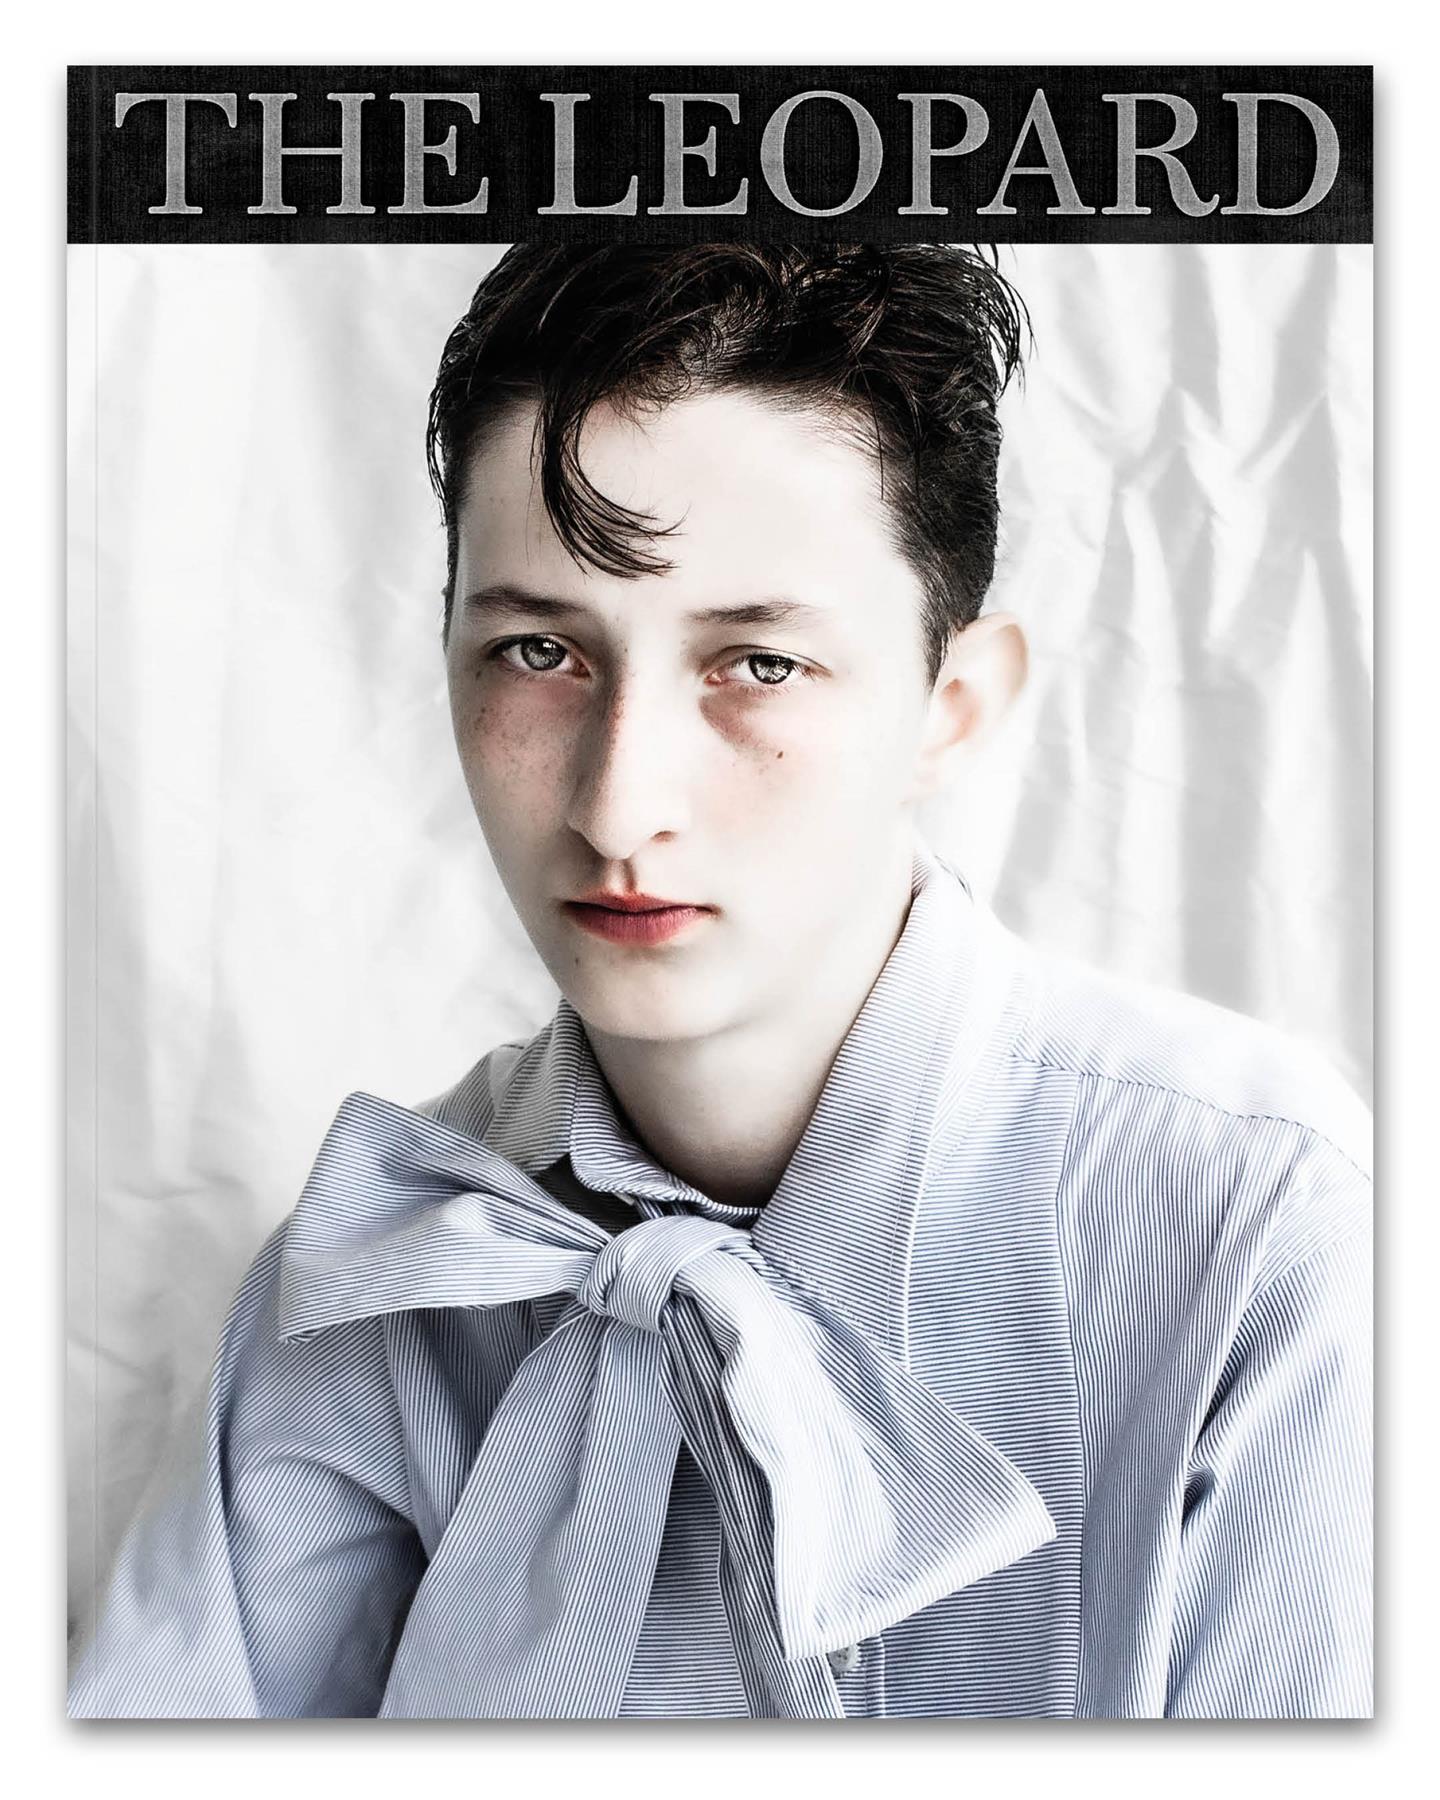 The Leopard - Issue 02, cover 6